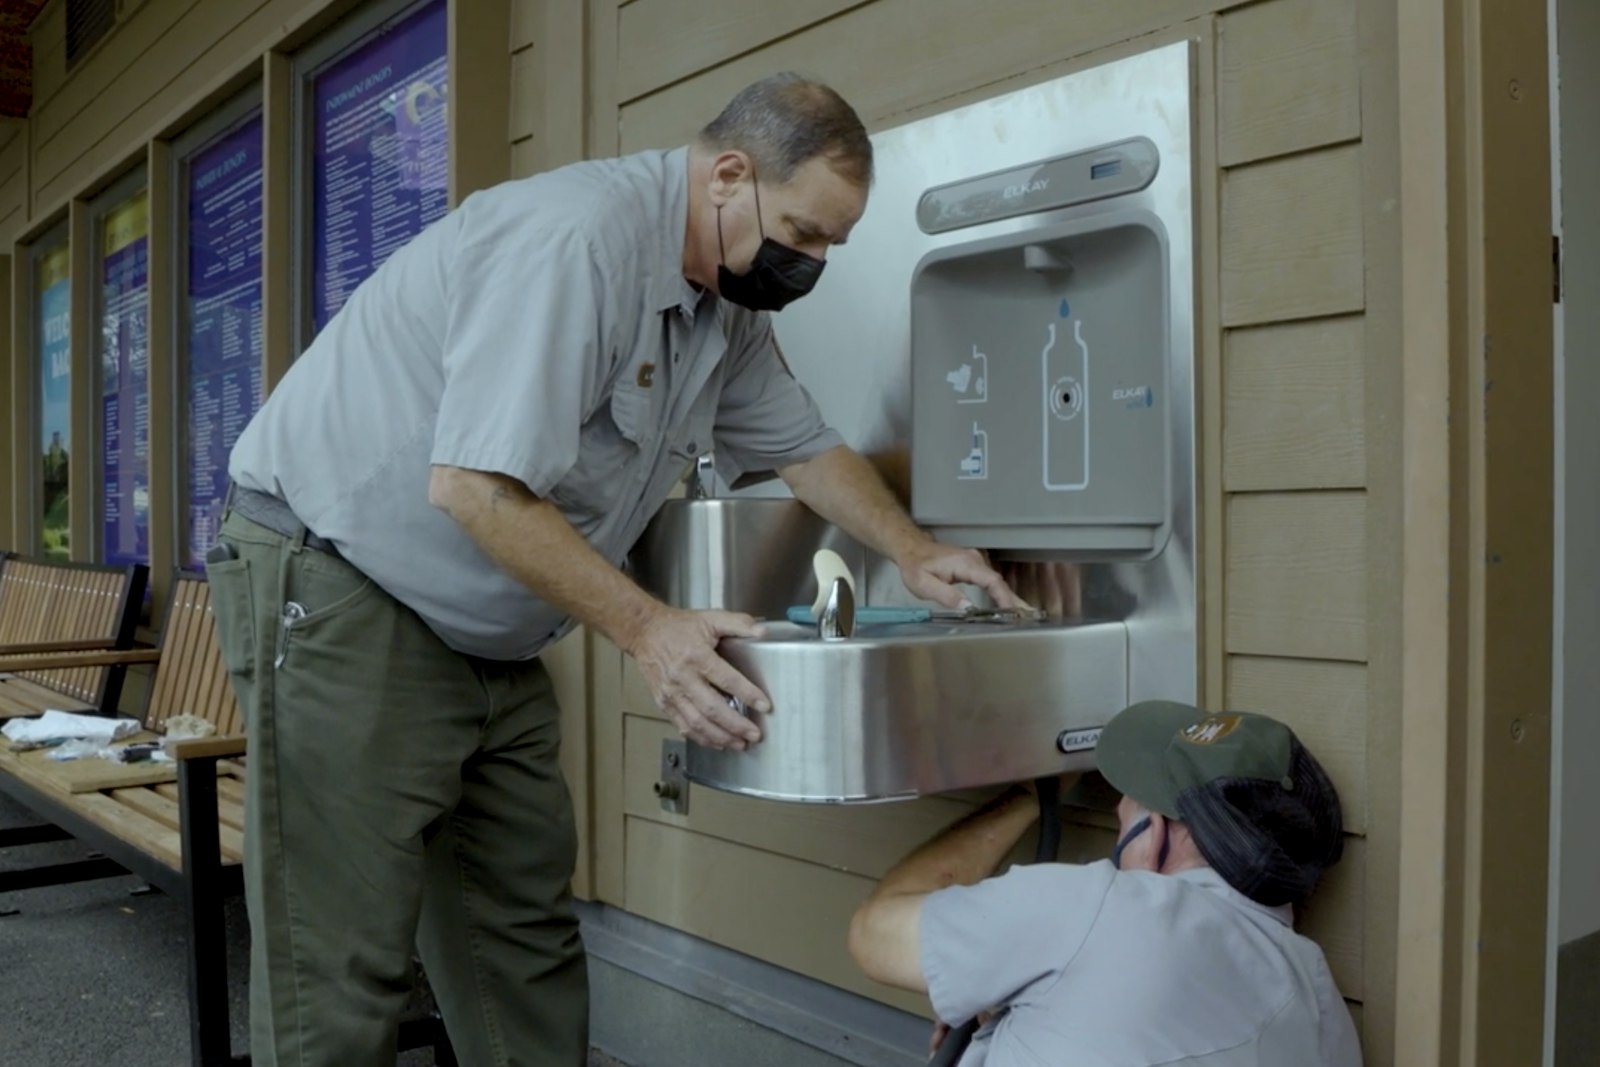 Two uniformed rangers hold and install a water bottle refill station on the exterior of a building, next to a row of benches